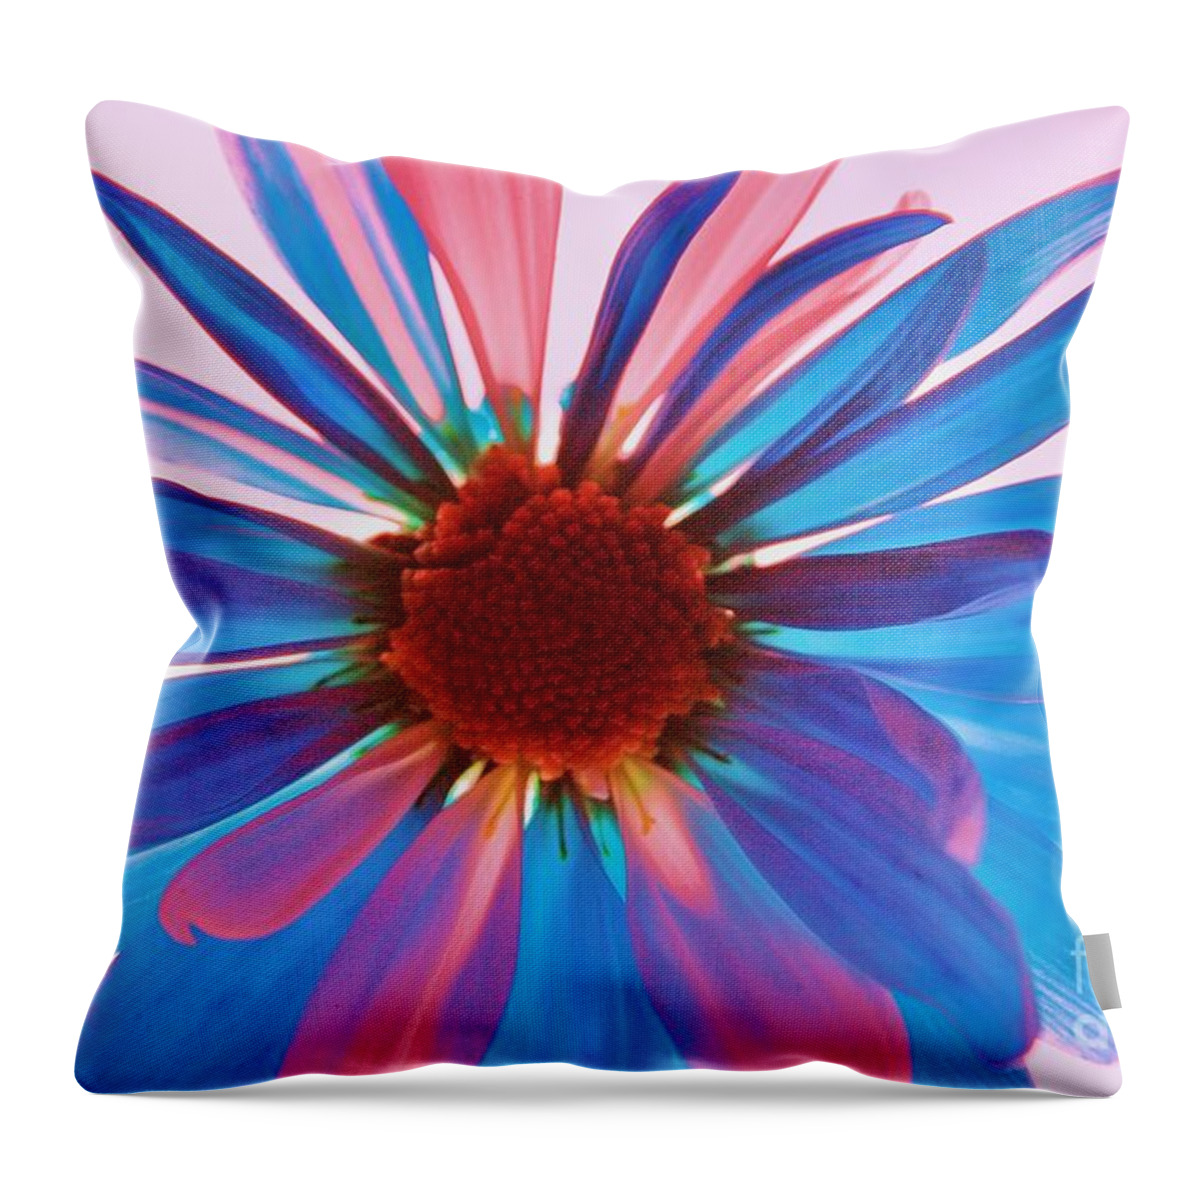 Flower Throw Pillow featuring the photograph Glass Petals by Julie Lueders 